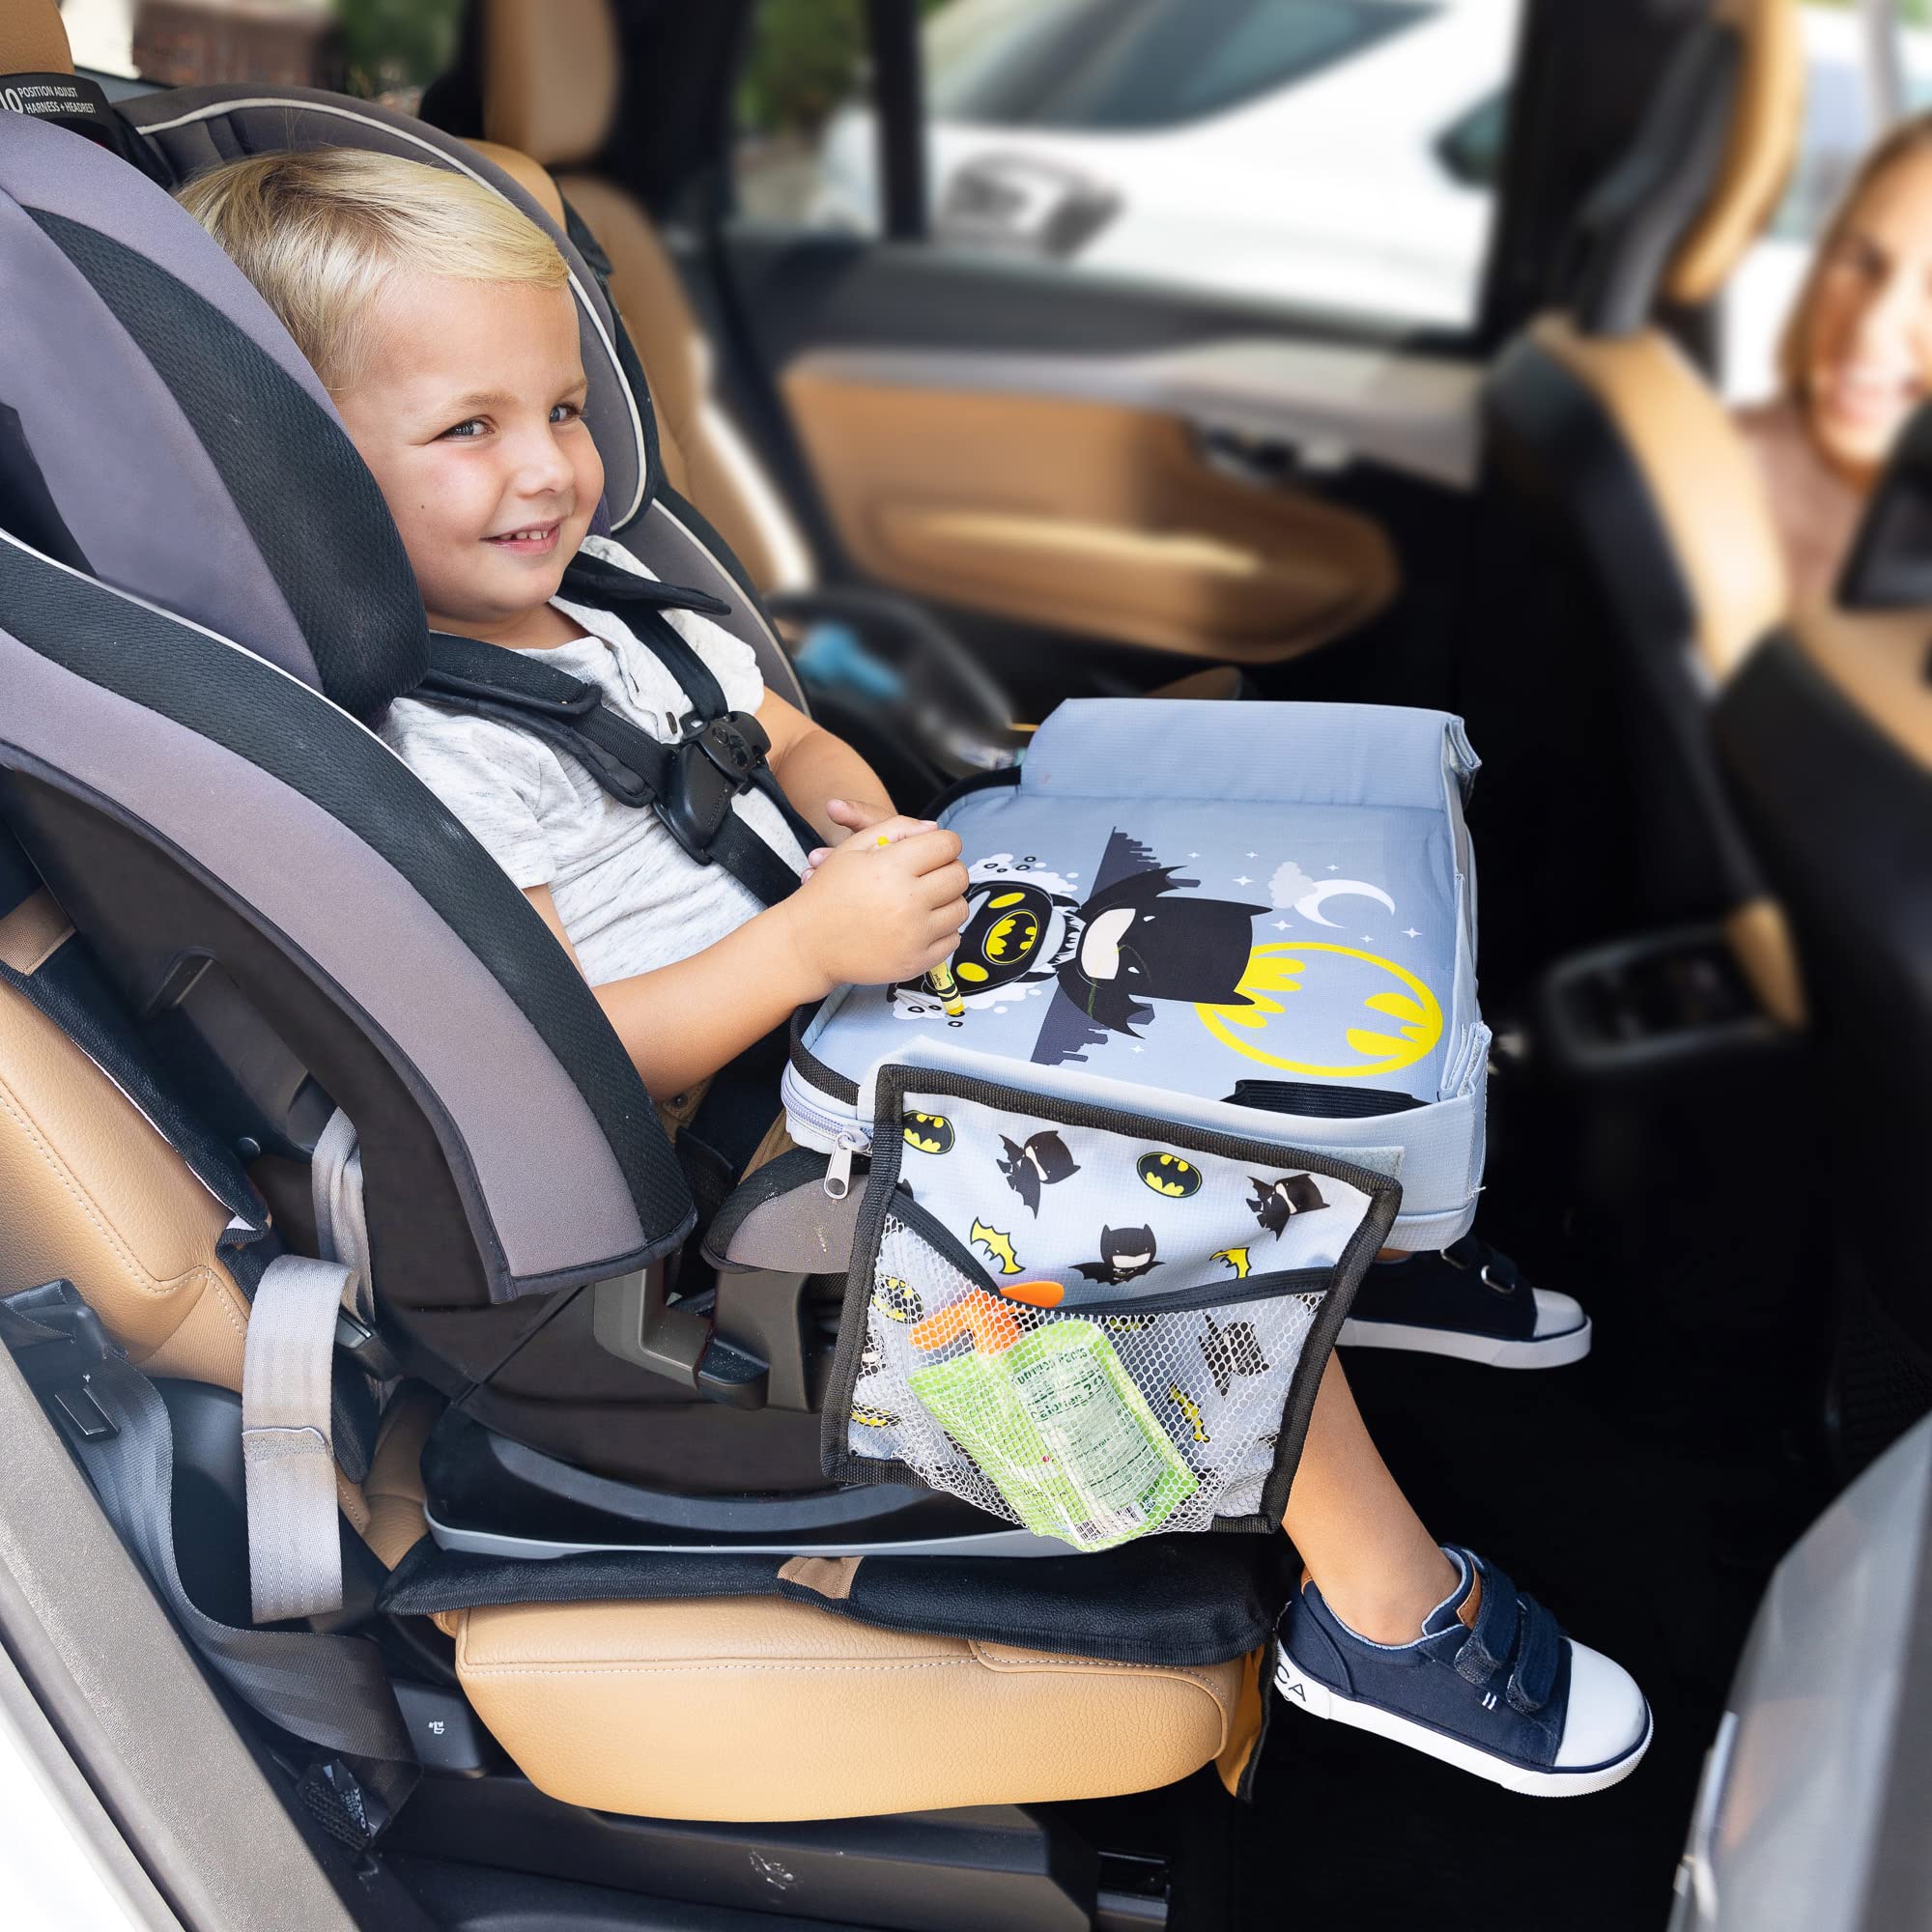 Kids travel tray, Tablet holder for car, Best travel accessories